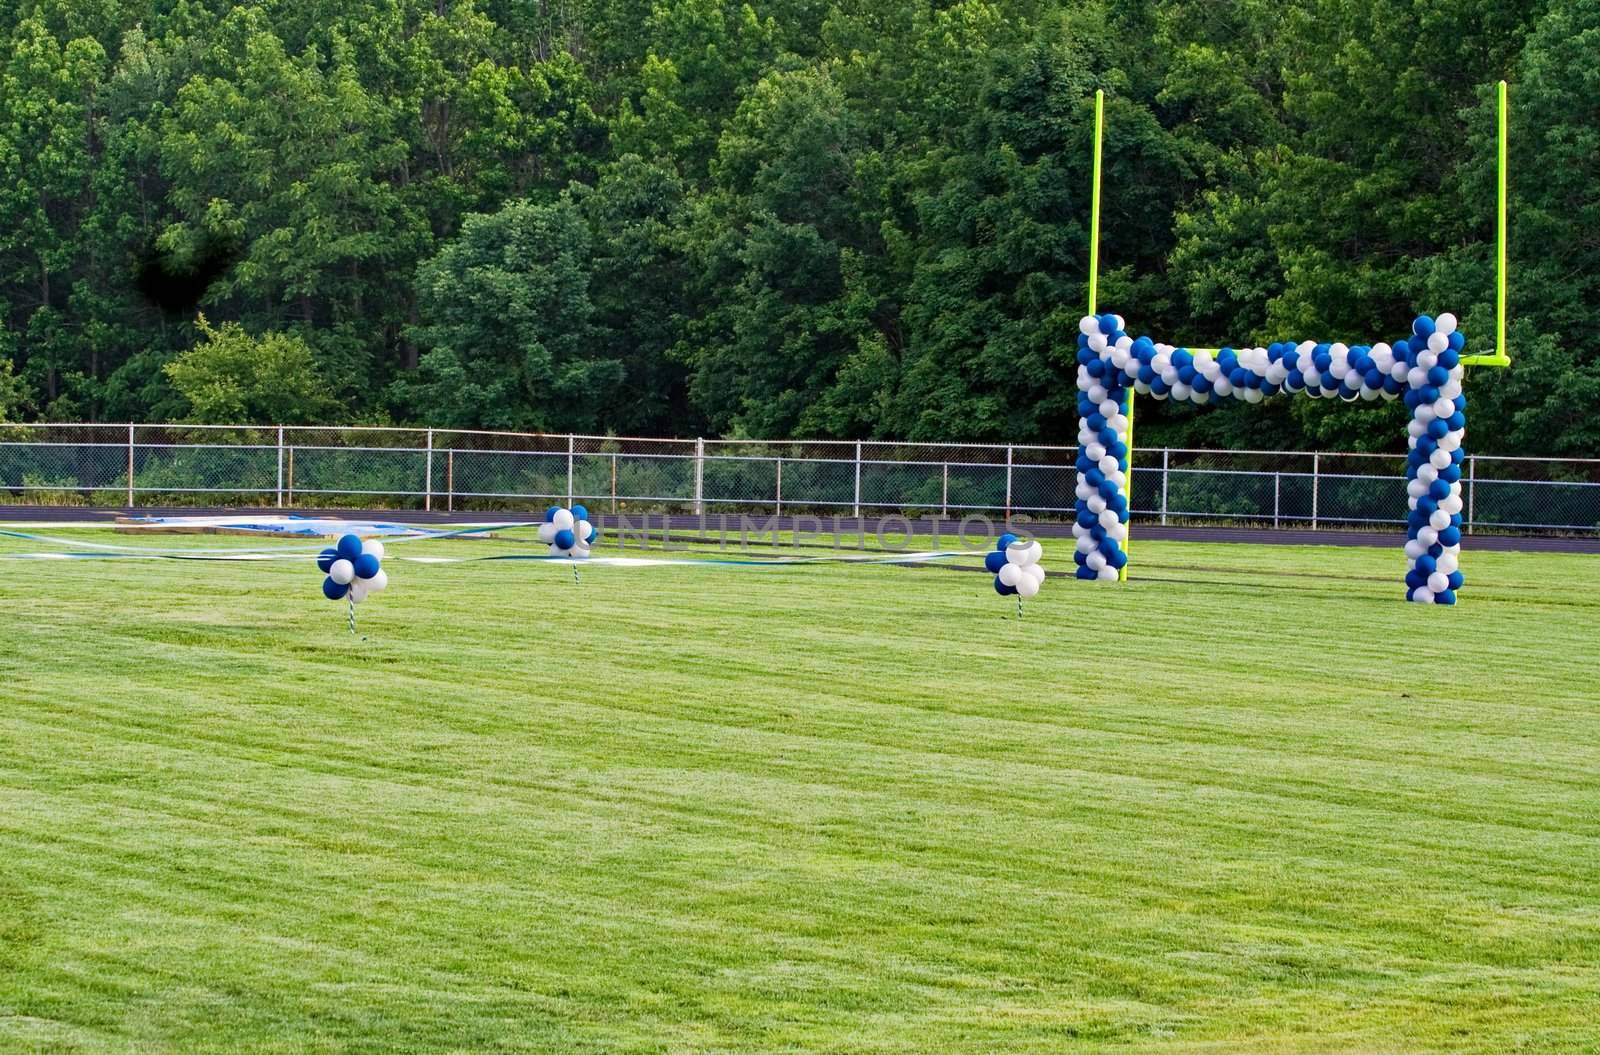 Goal Post and Balloons by sbonk